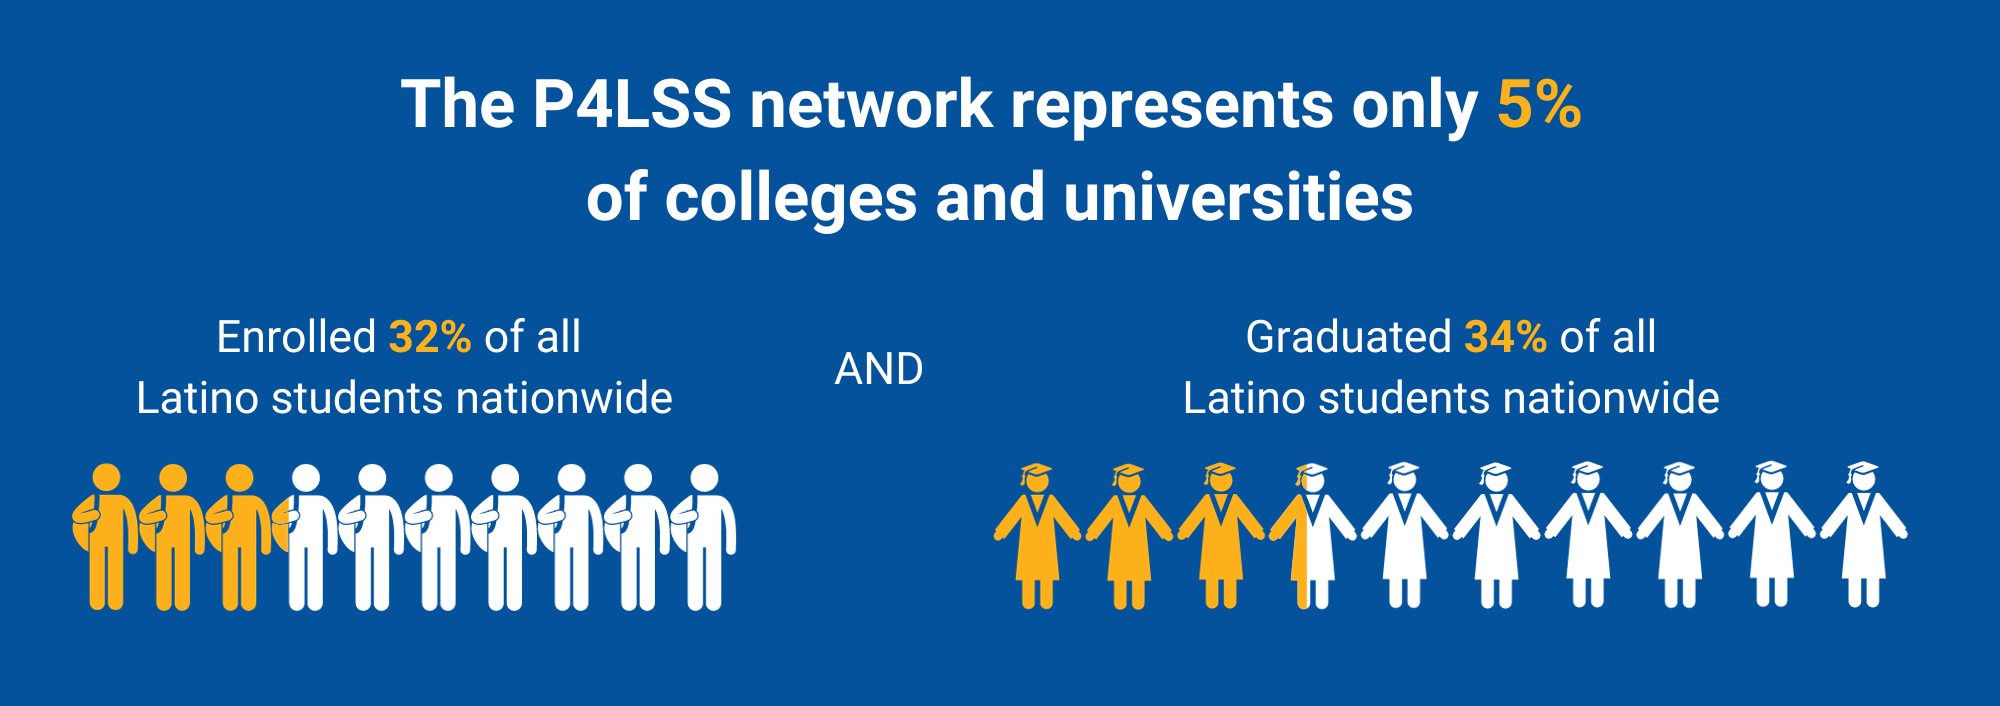 The P4LSS network represented only 5% of colleges/universities yet enrolled 32% and graduated 34% of all Latino students.